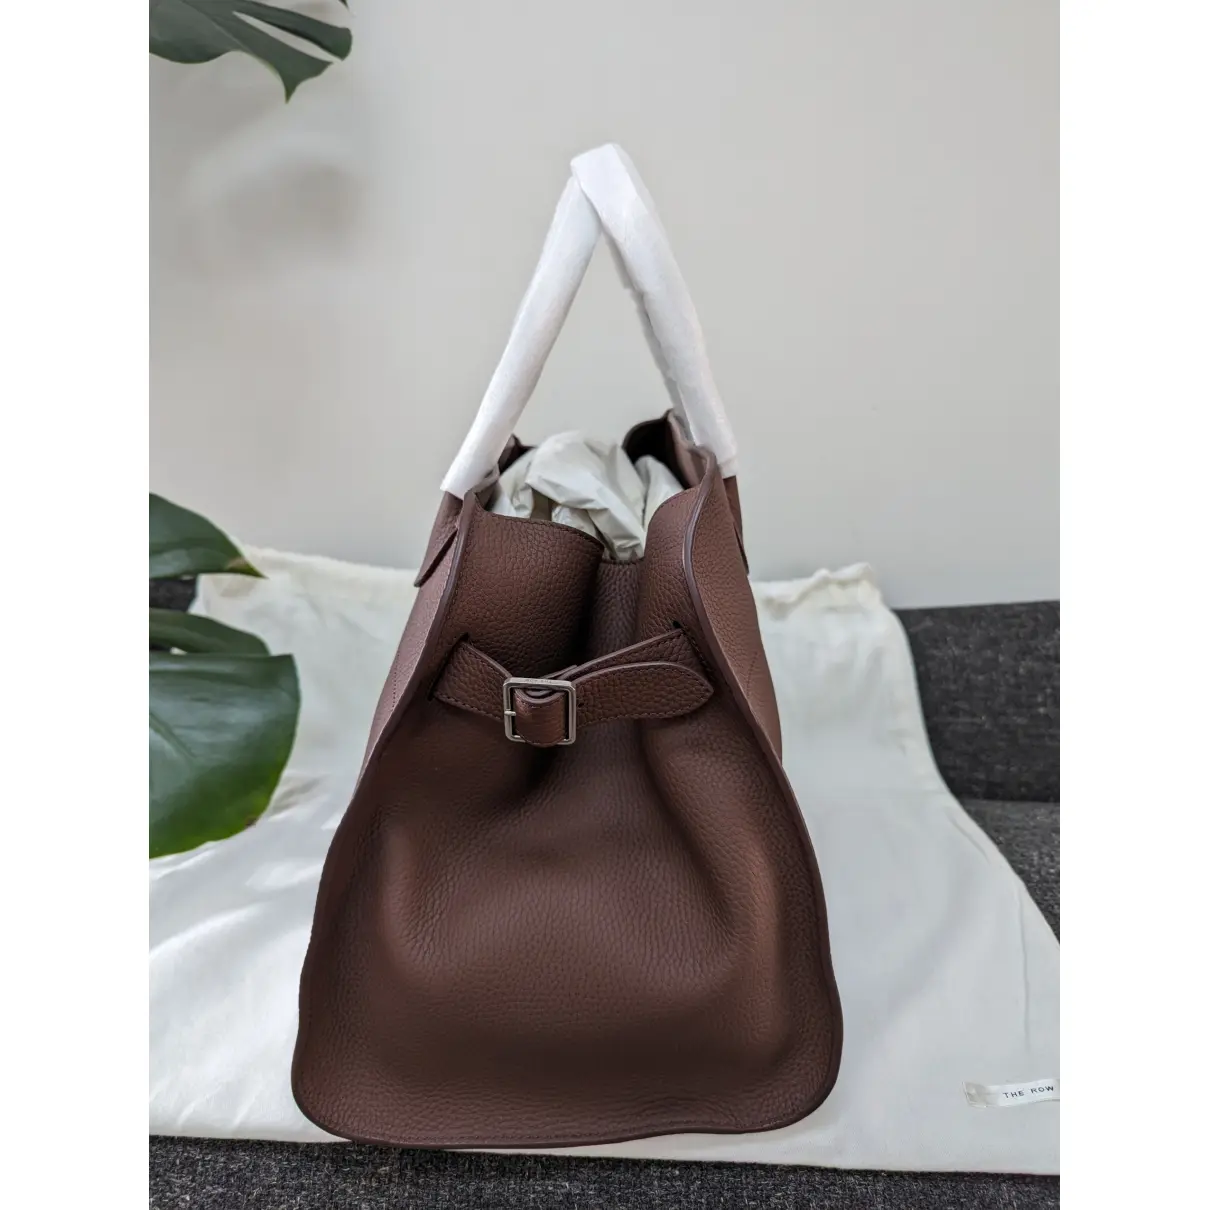 Buy The Row Margaux leather tote online